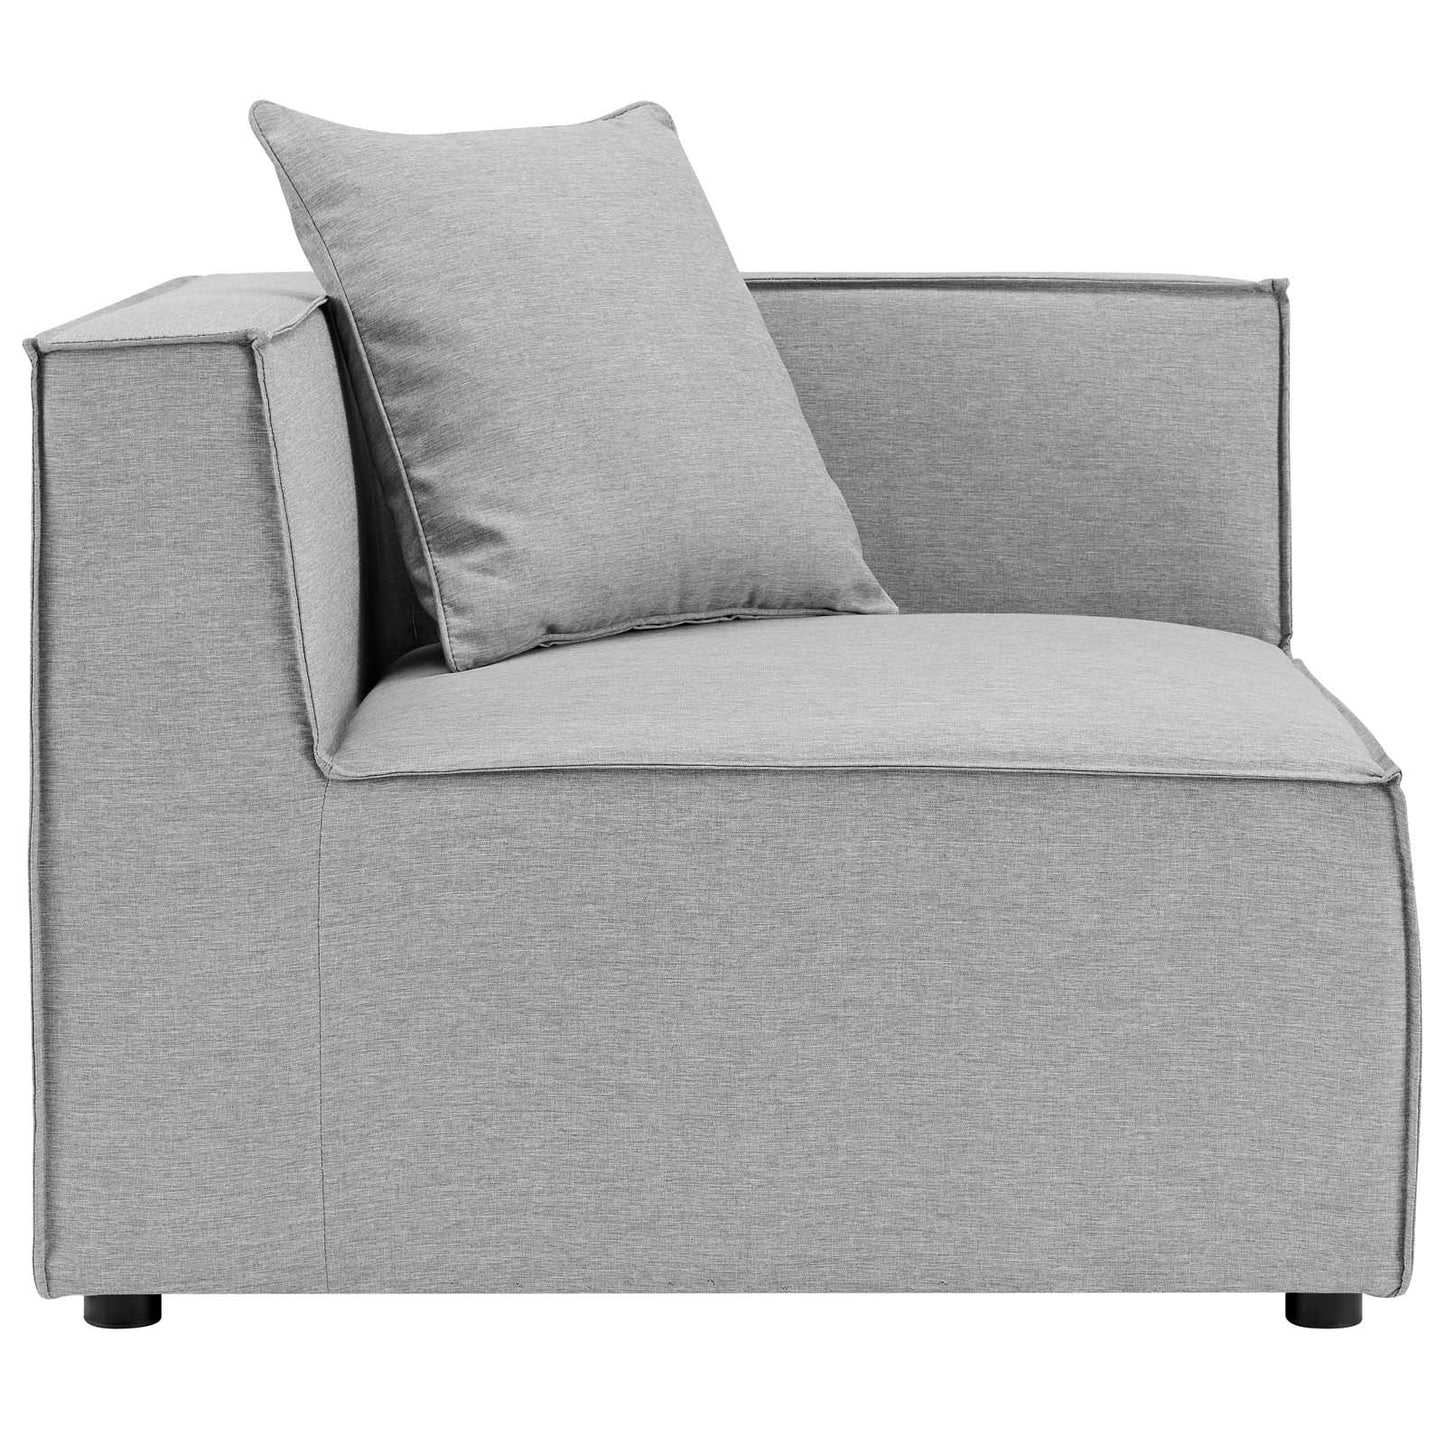 Saybrook Outdoor Patio Upholstered 2-Piece Sectional Sofa Loveseat Gray EEI-4377-GRY